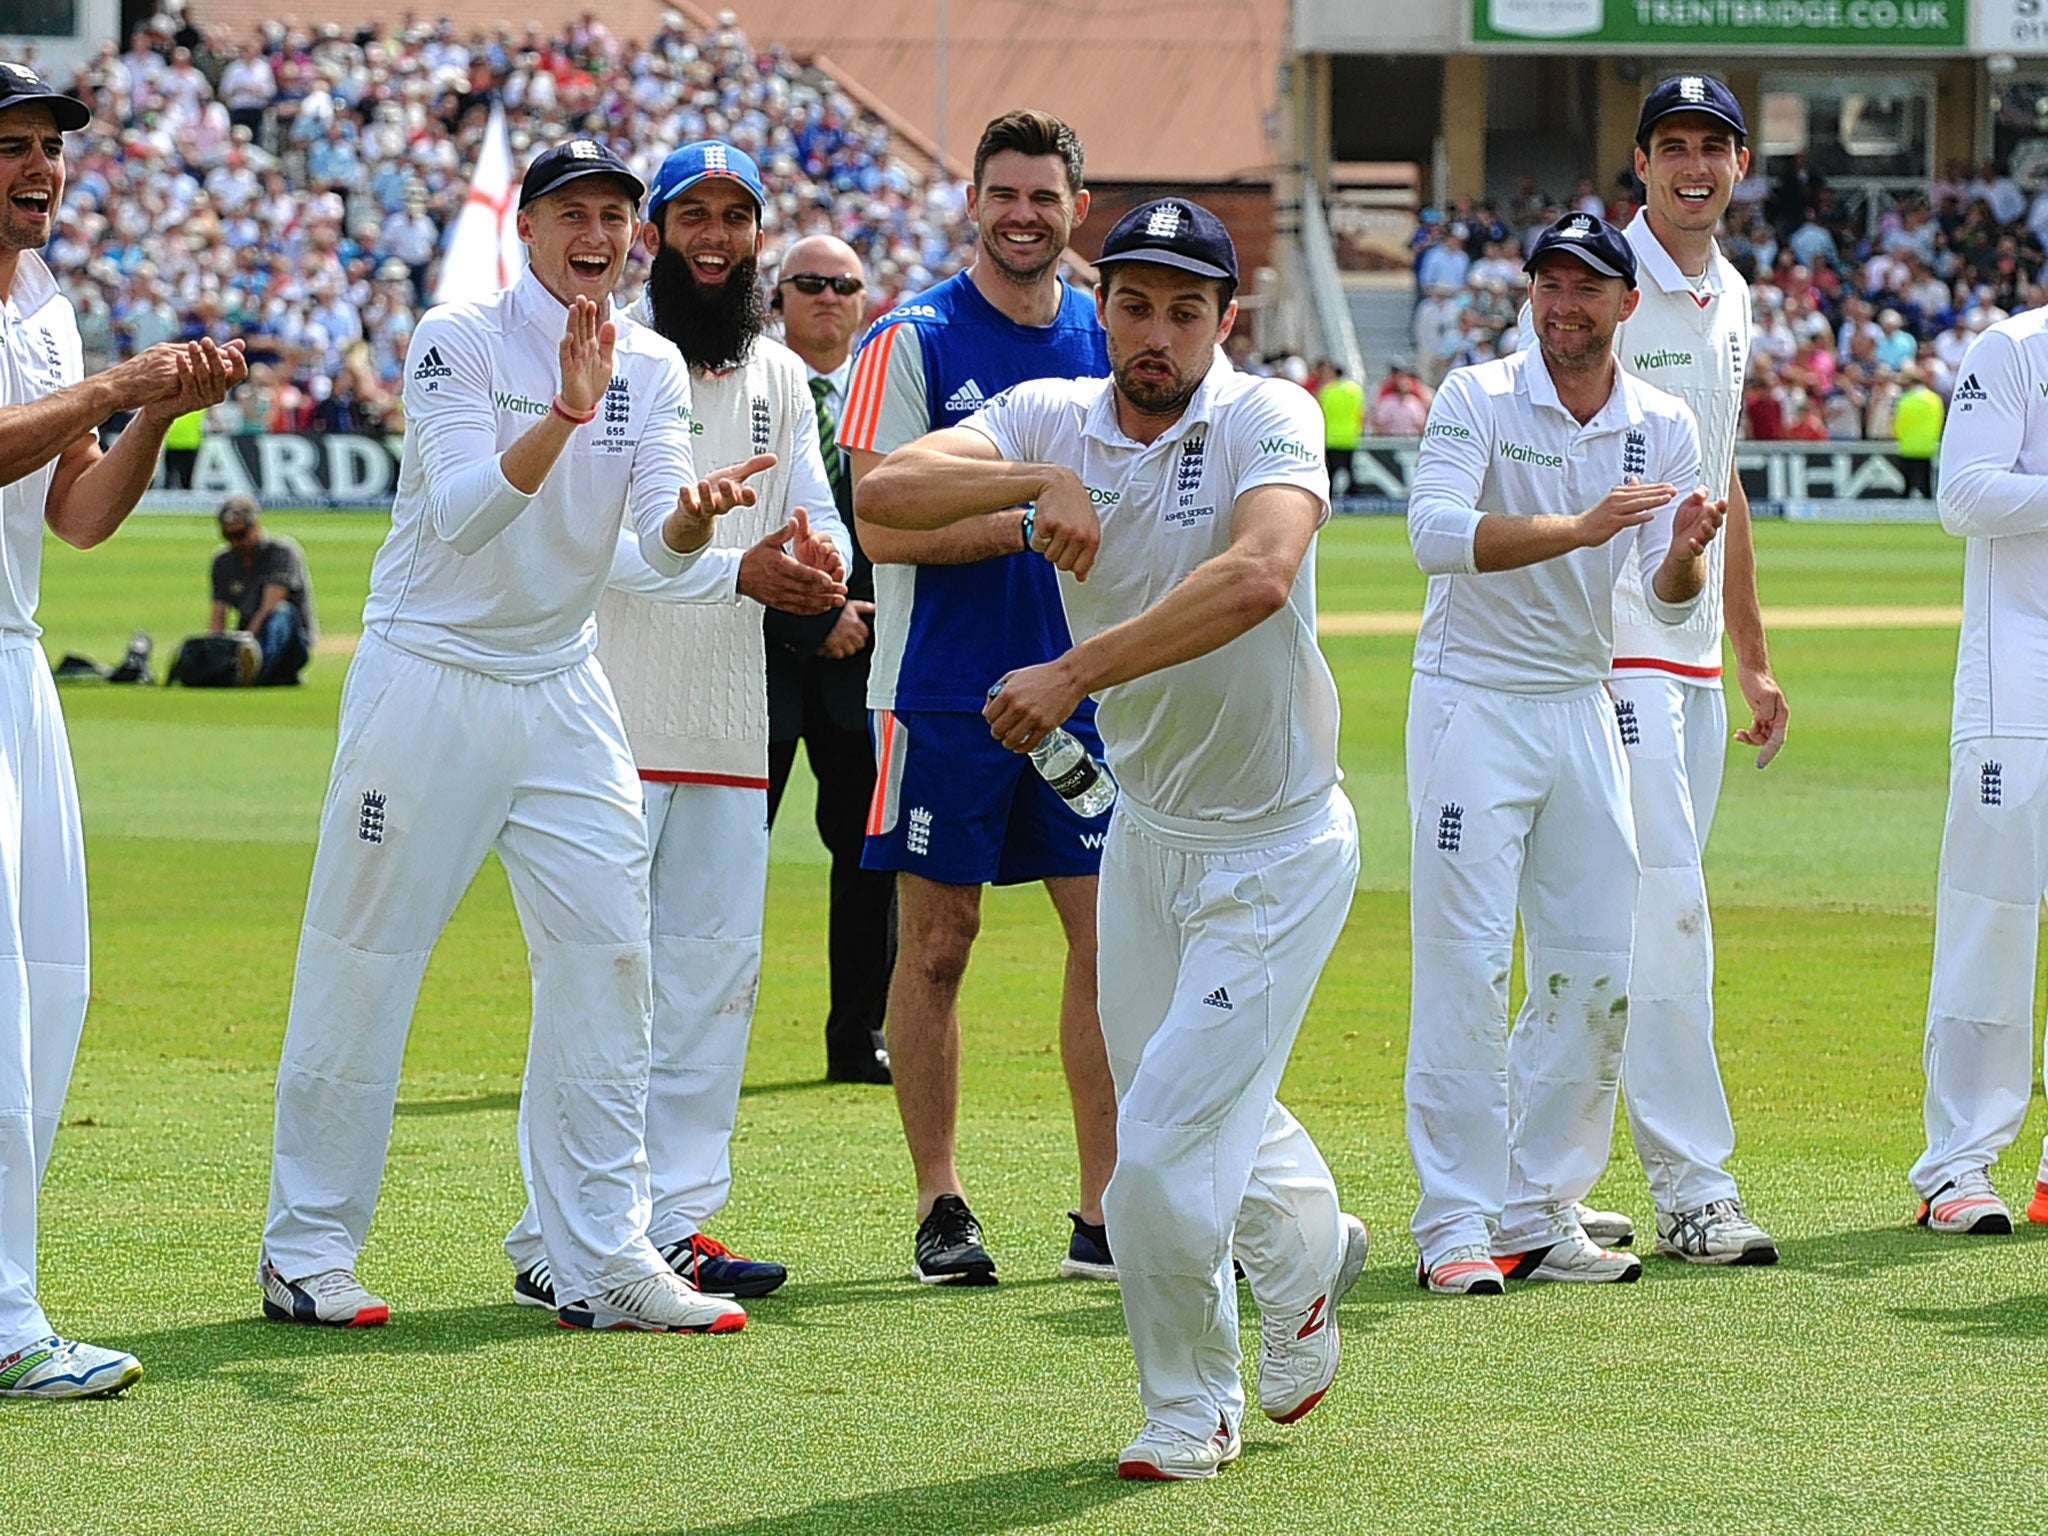 Mark Wood performs his imaginary horse act, to the delight of his team-mates